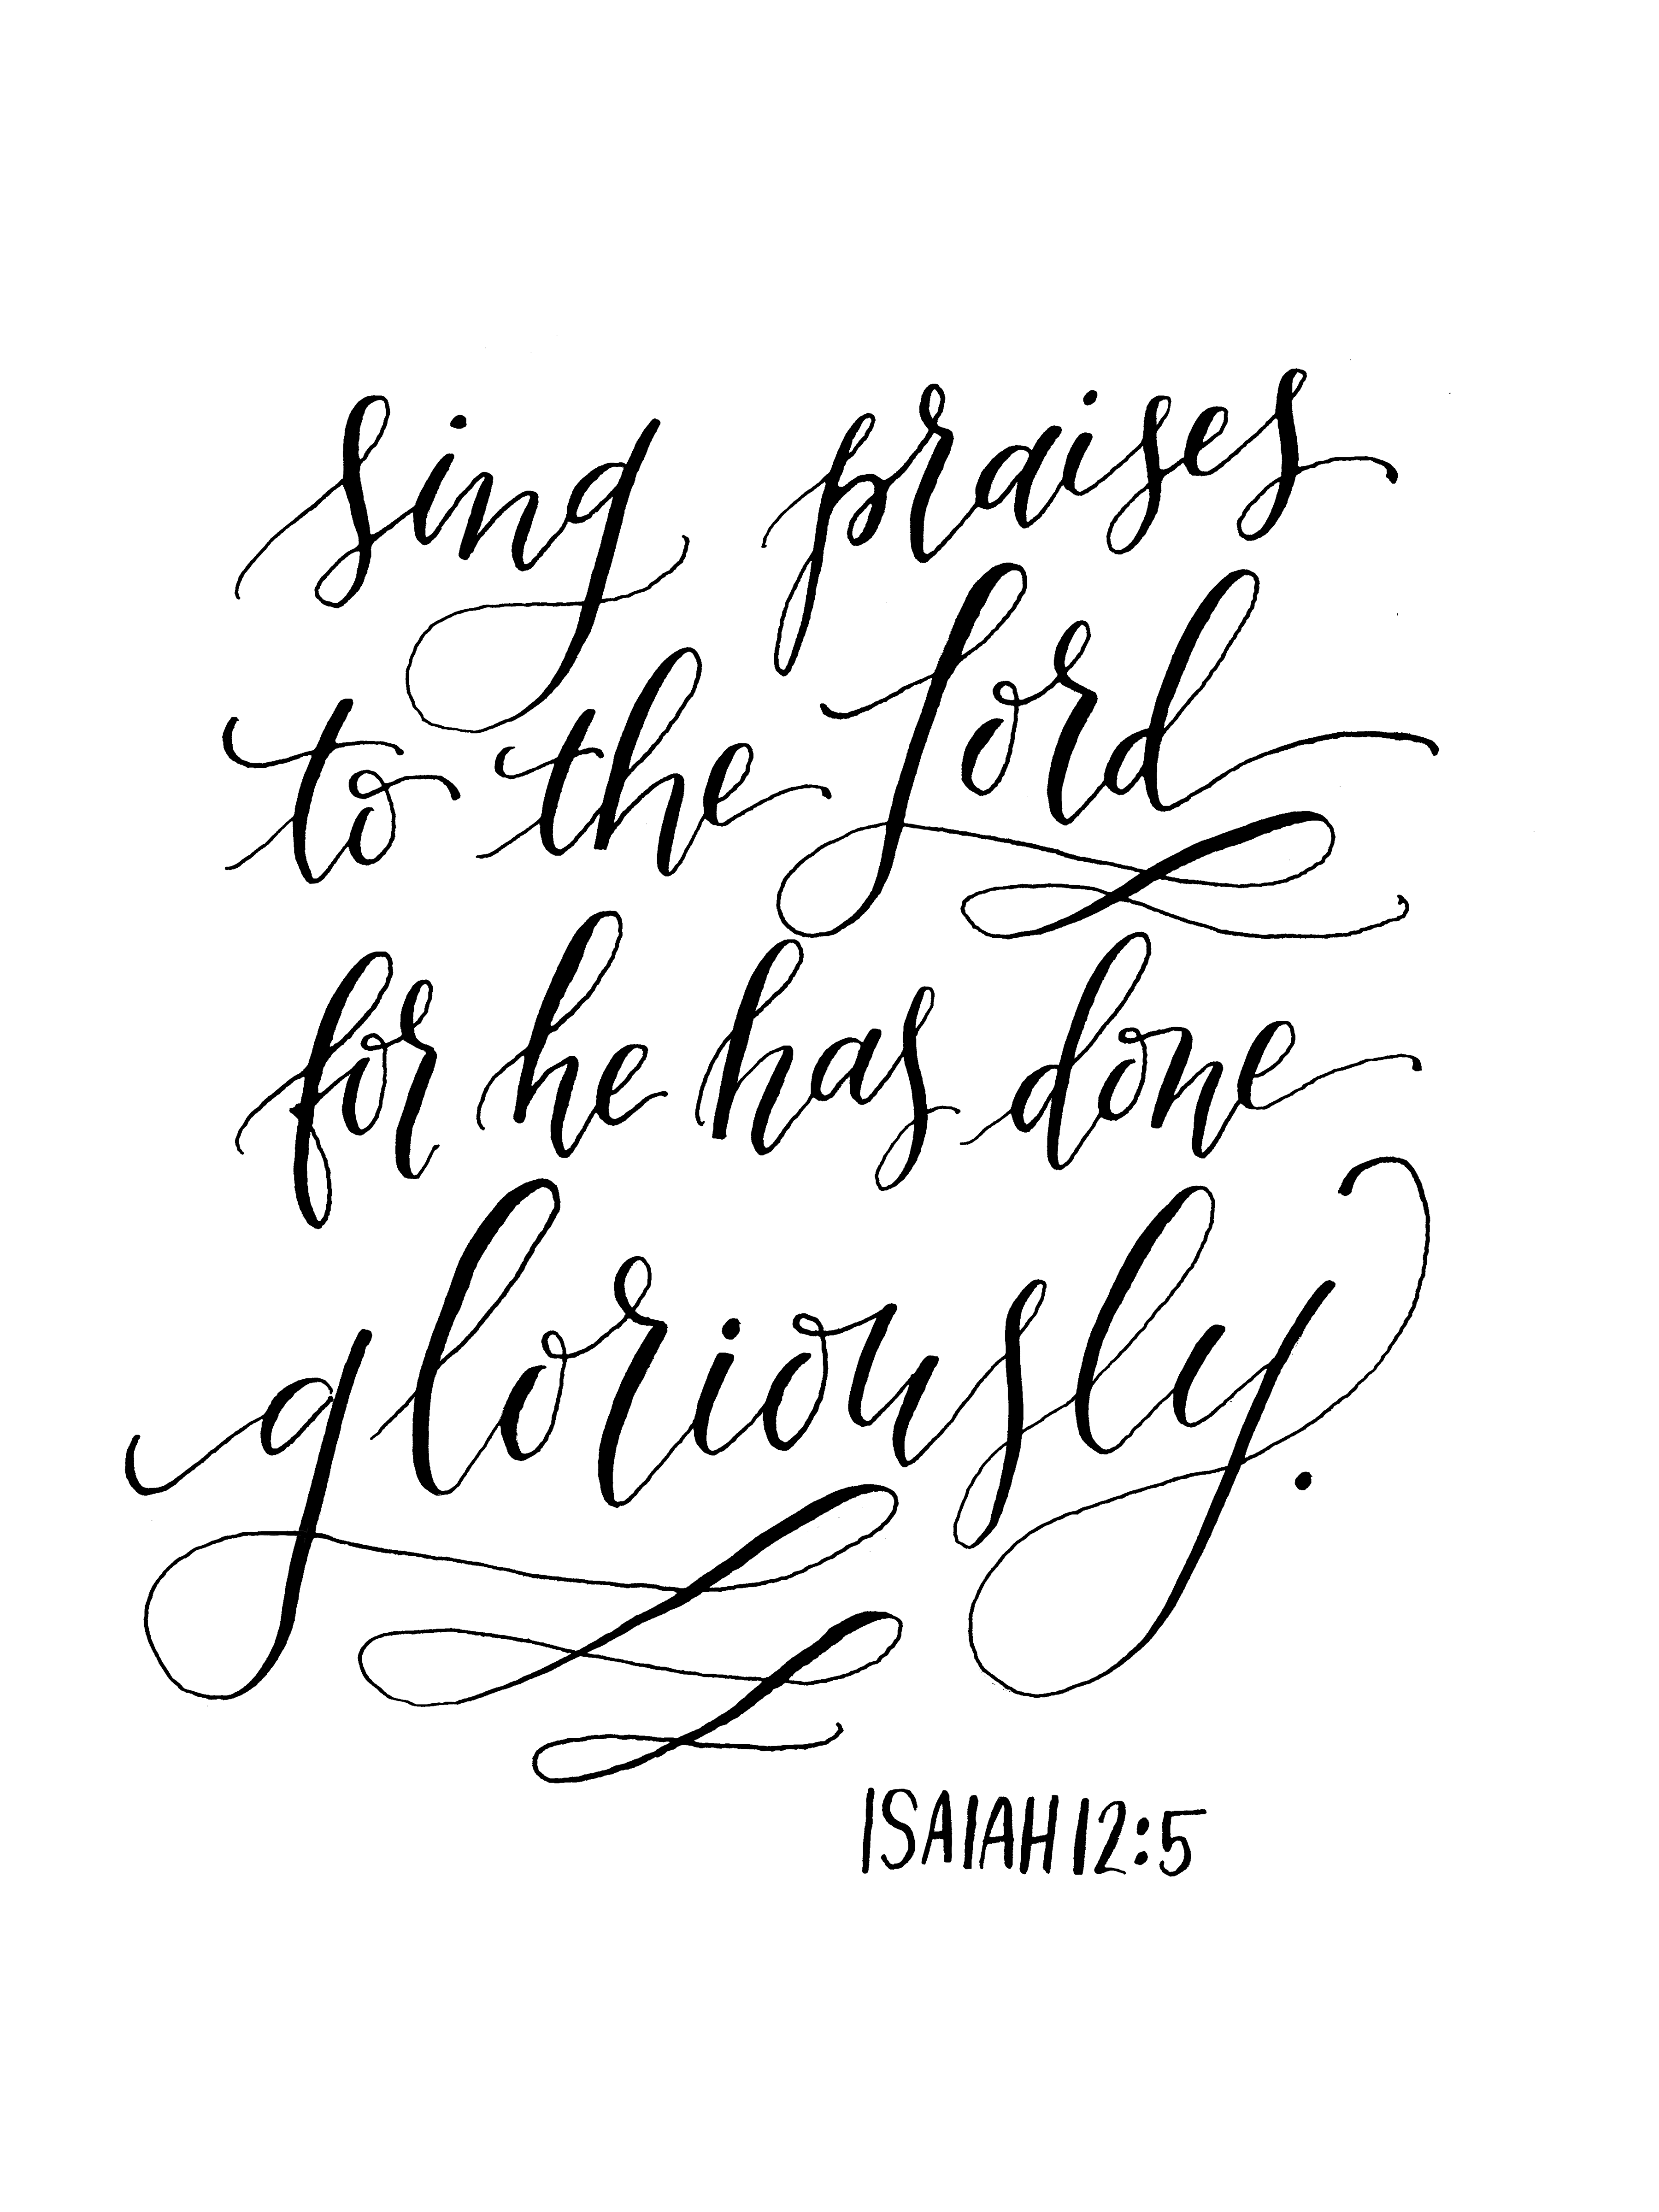 sing praises to the lord_6x8